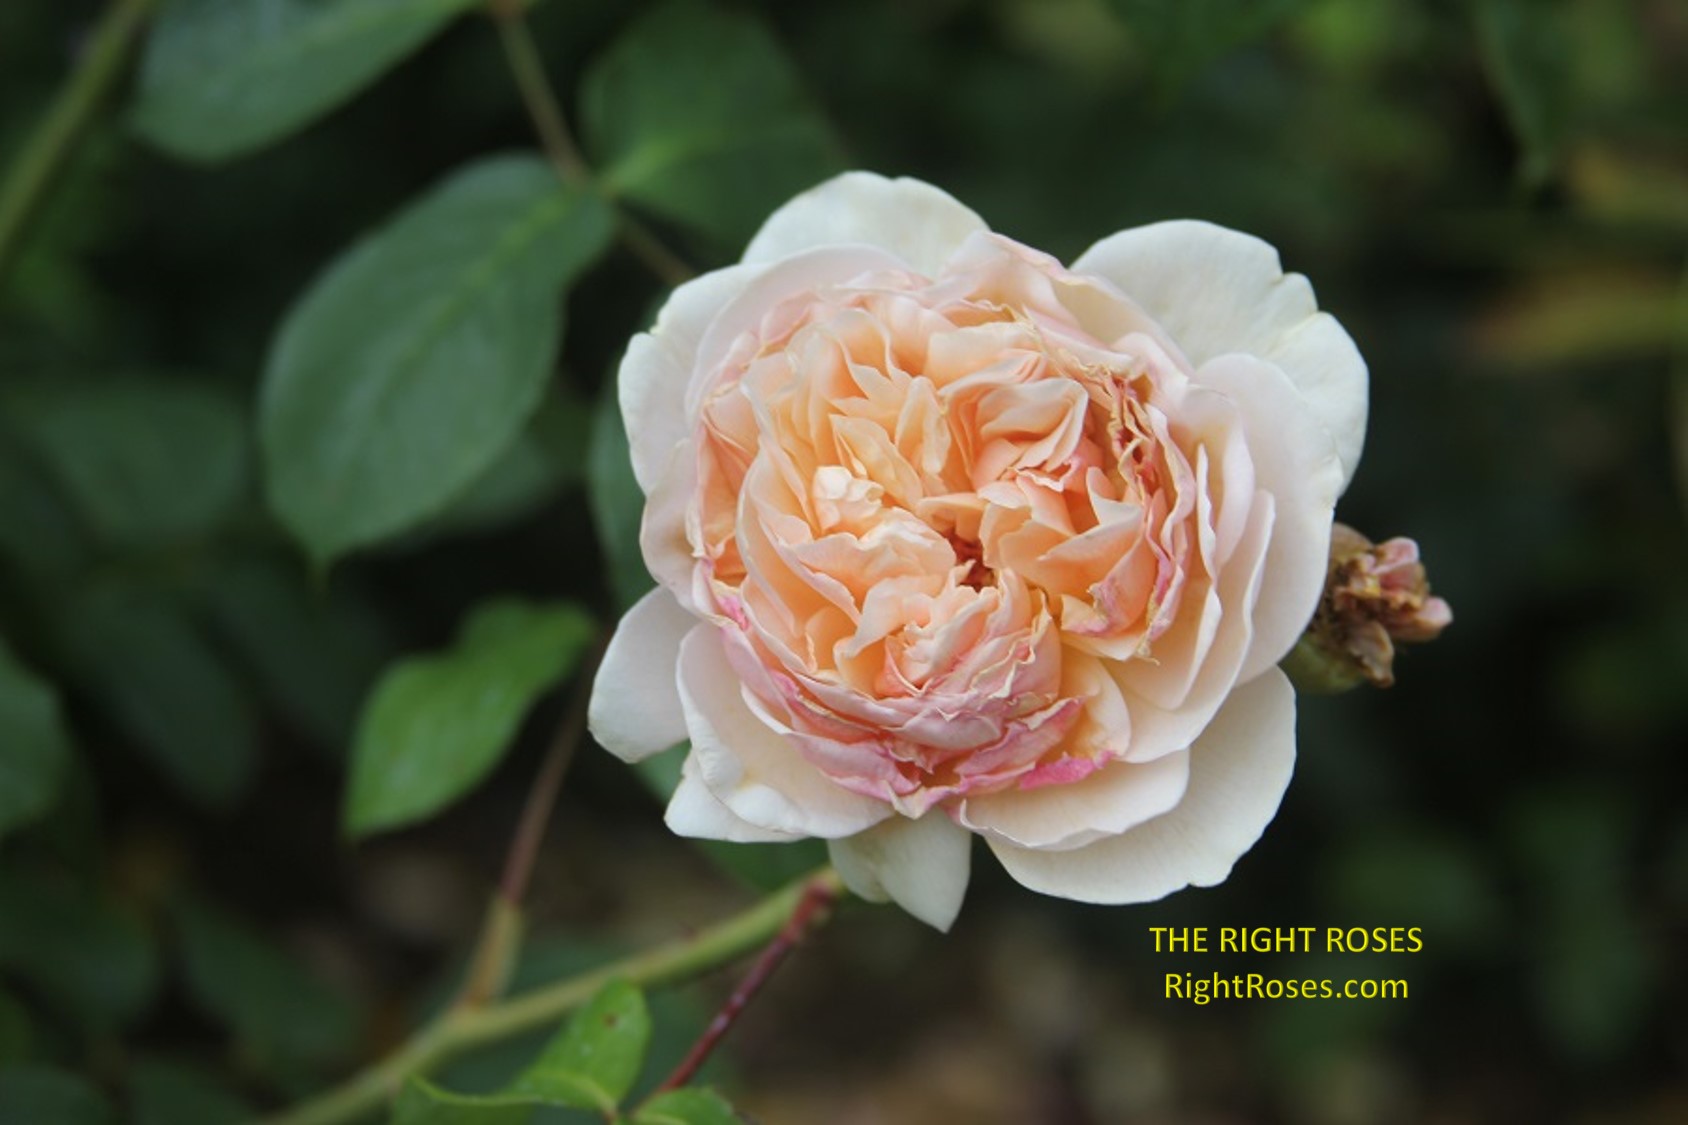 Sweet Juliet t rose review the right roses score best top garden store david austin english roses rose products rose rating the right leap rose food fertilizer